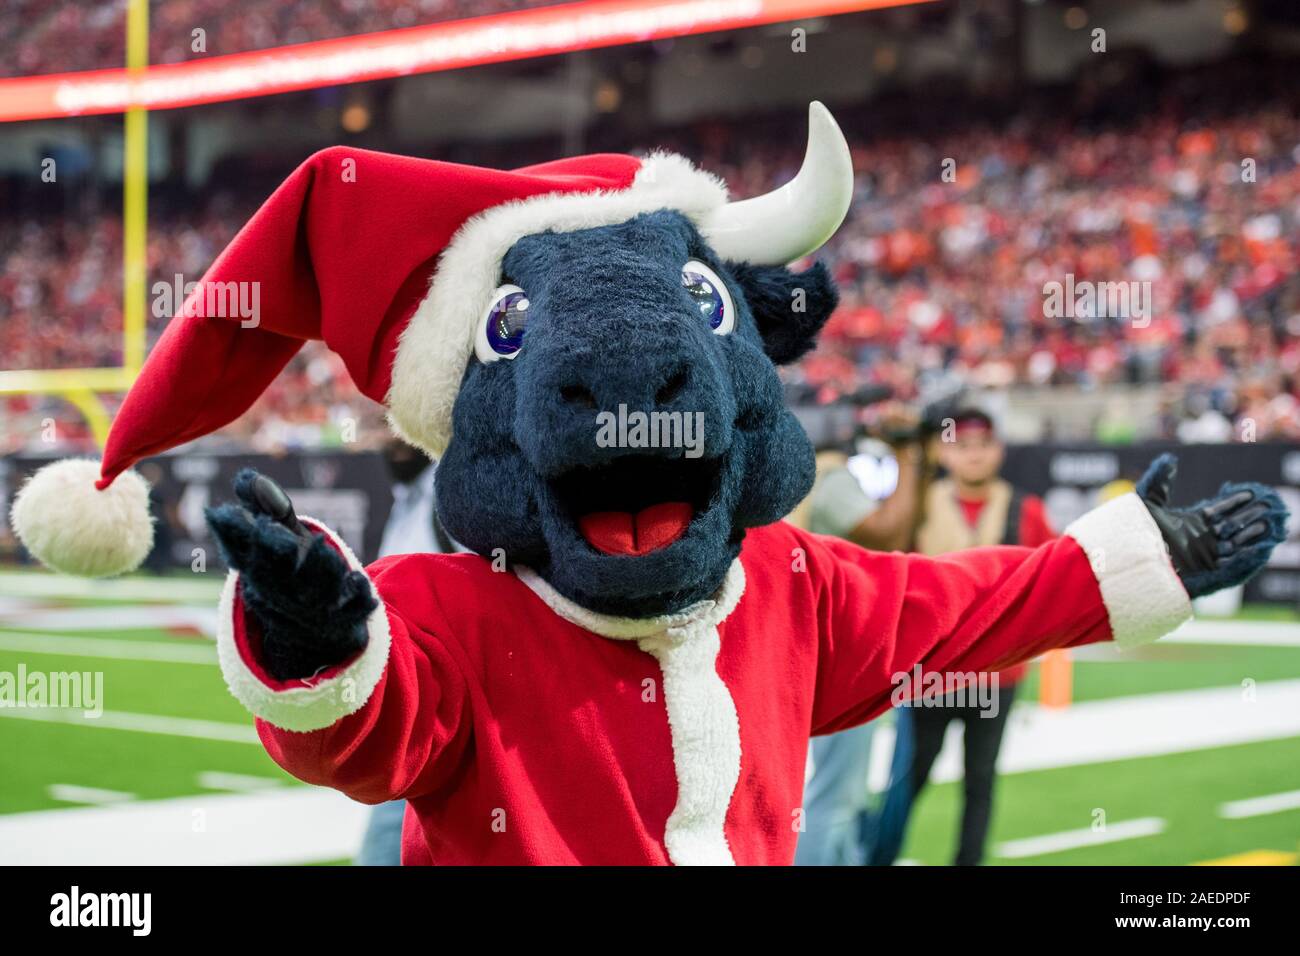 Houston, TX, USA. 8th Dec, 2019. Houston Texans mascot Toro wears a Santa Claus outfit during the 3rd quarter of an NFL football game between the Denver Broncos and the Houston Texans at NRG Stadium in Houston, TX. The Broncos won the game 38 to 24.Trask Smith/CSM/Alamy Live News Stock Photo